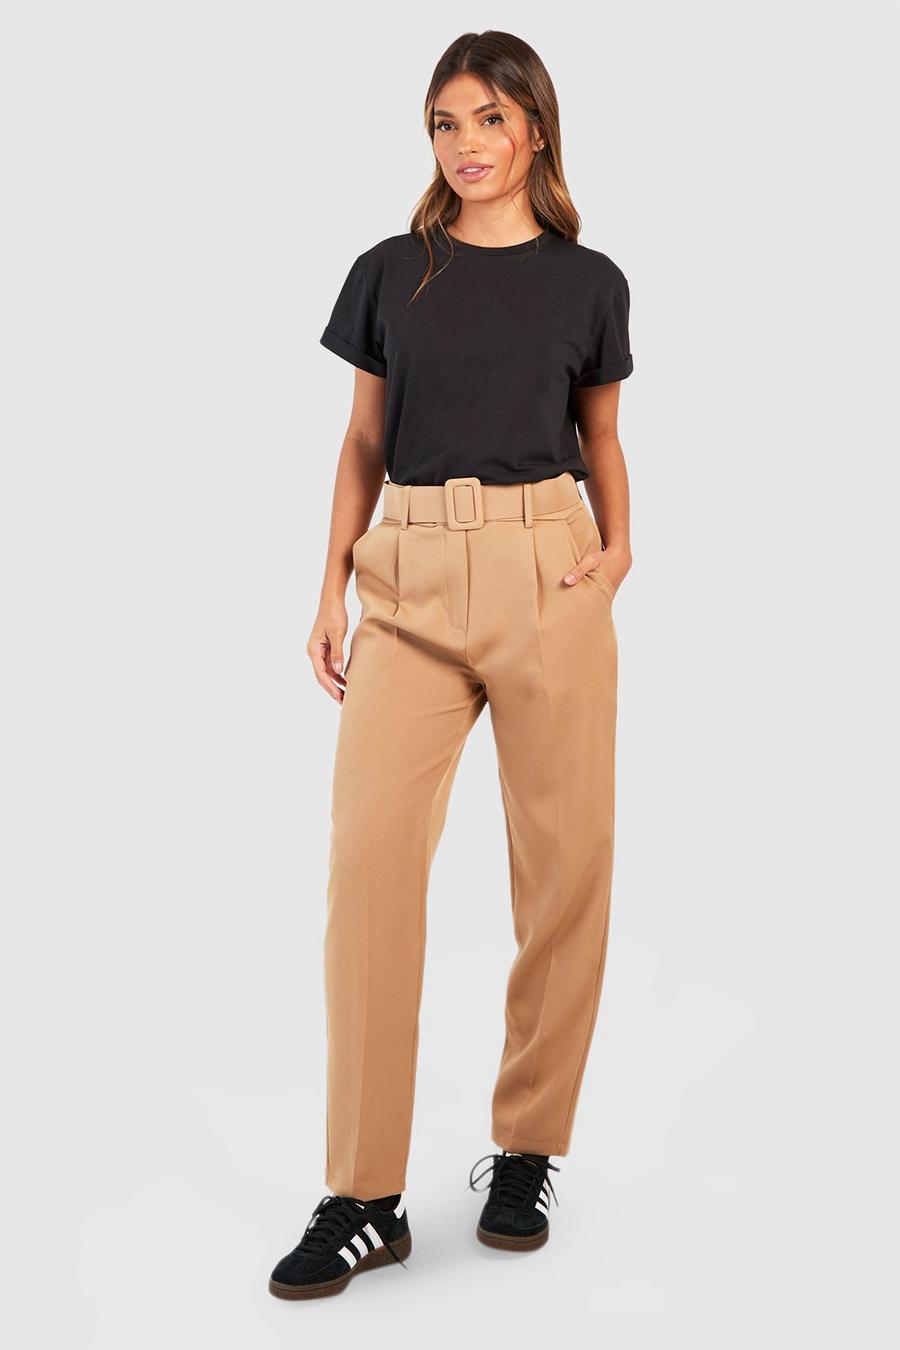 Camel Self Fabric Belted Slim Fit Pants